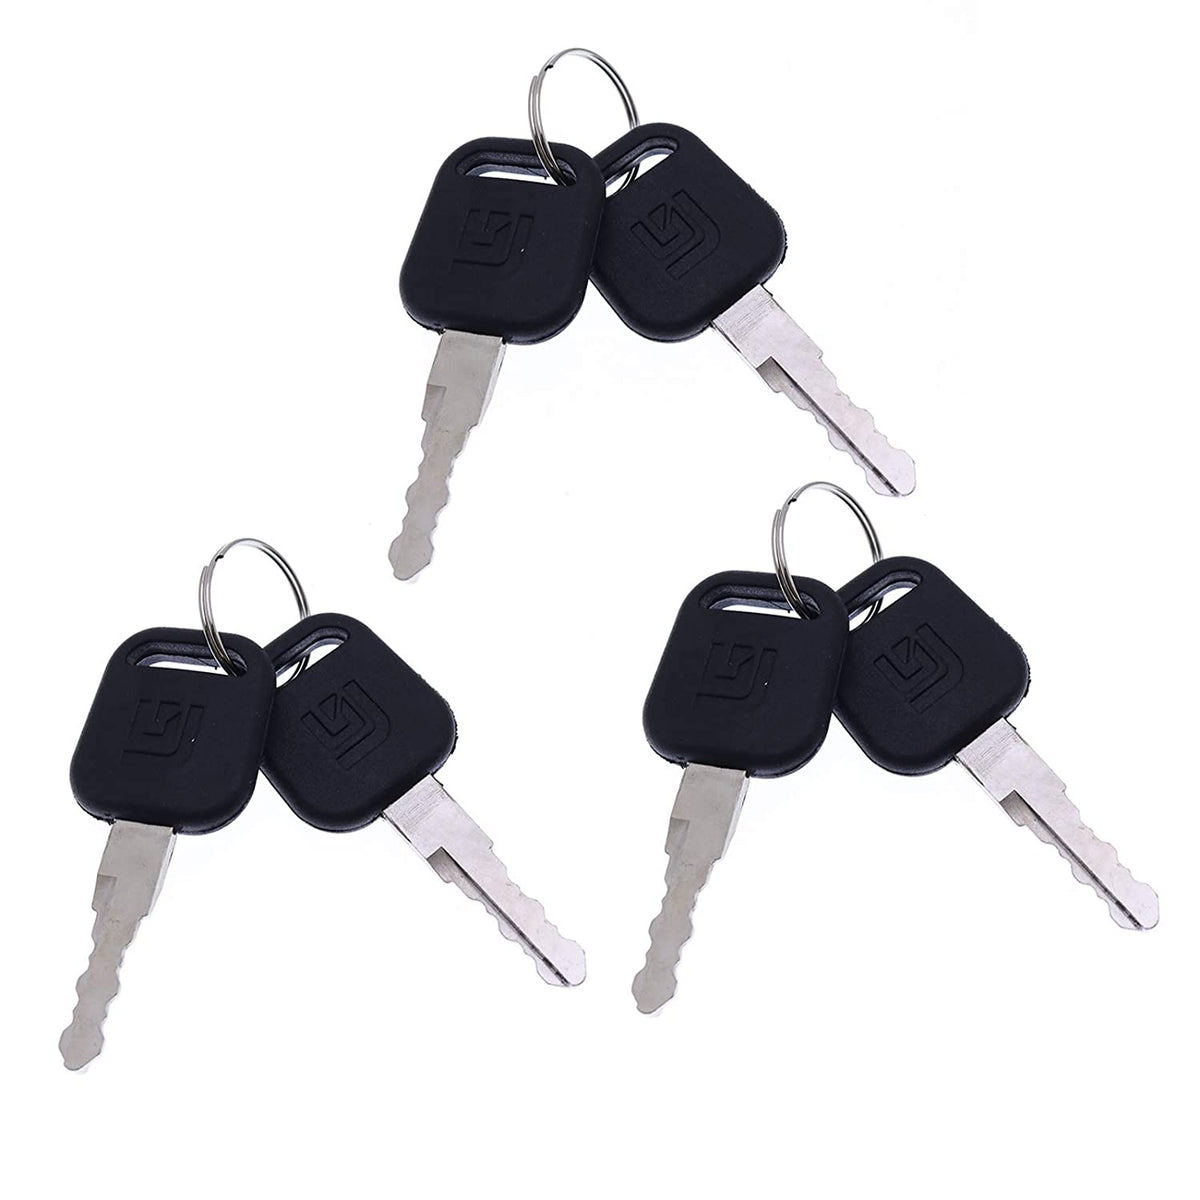 Ignition Keys 34B0557 for Liugong Excavator and Heavy Equipment (6) - KUDUPARTS